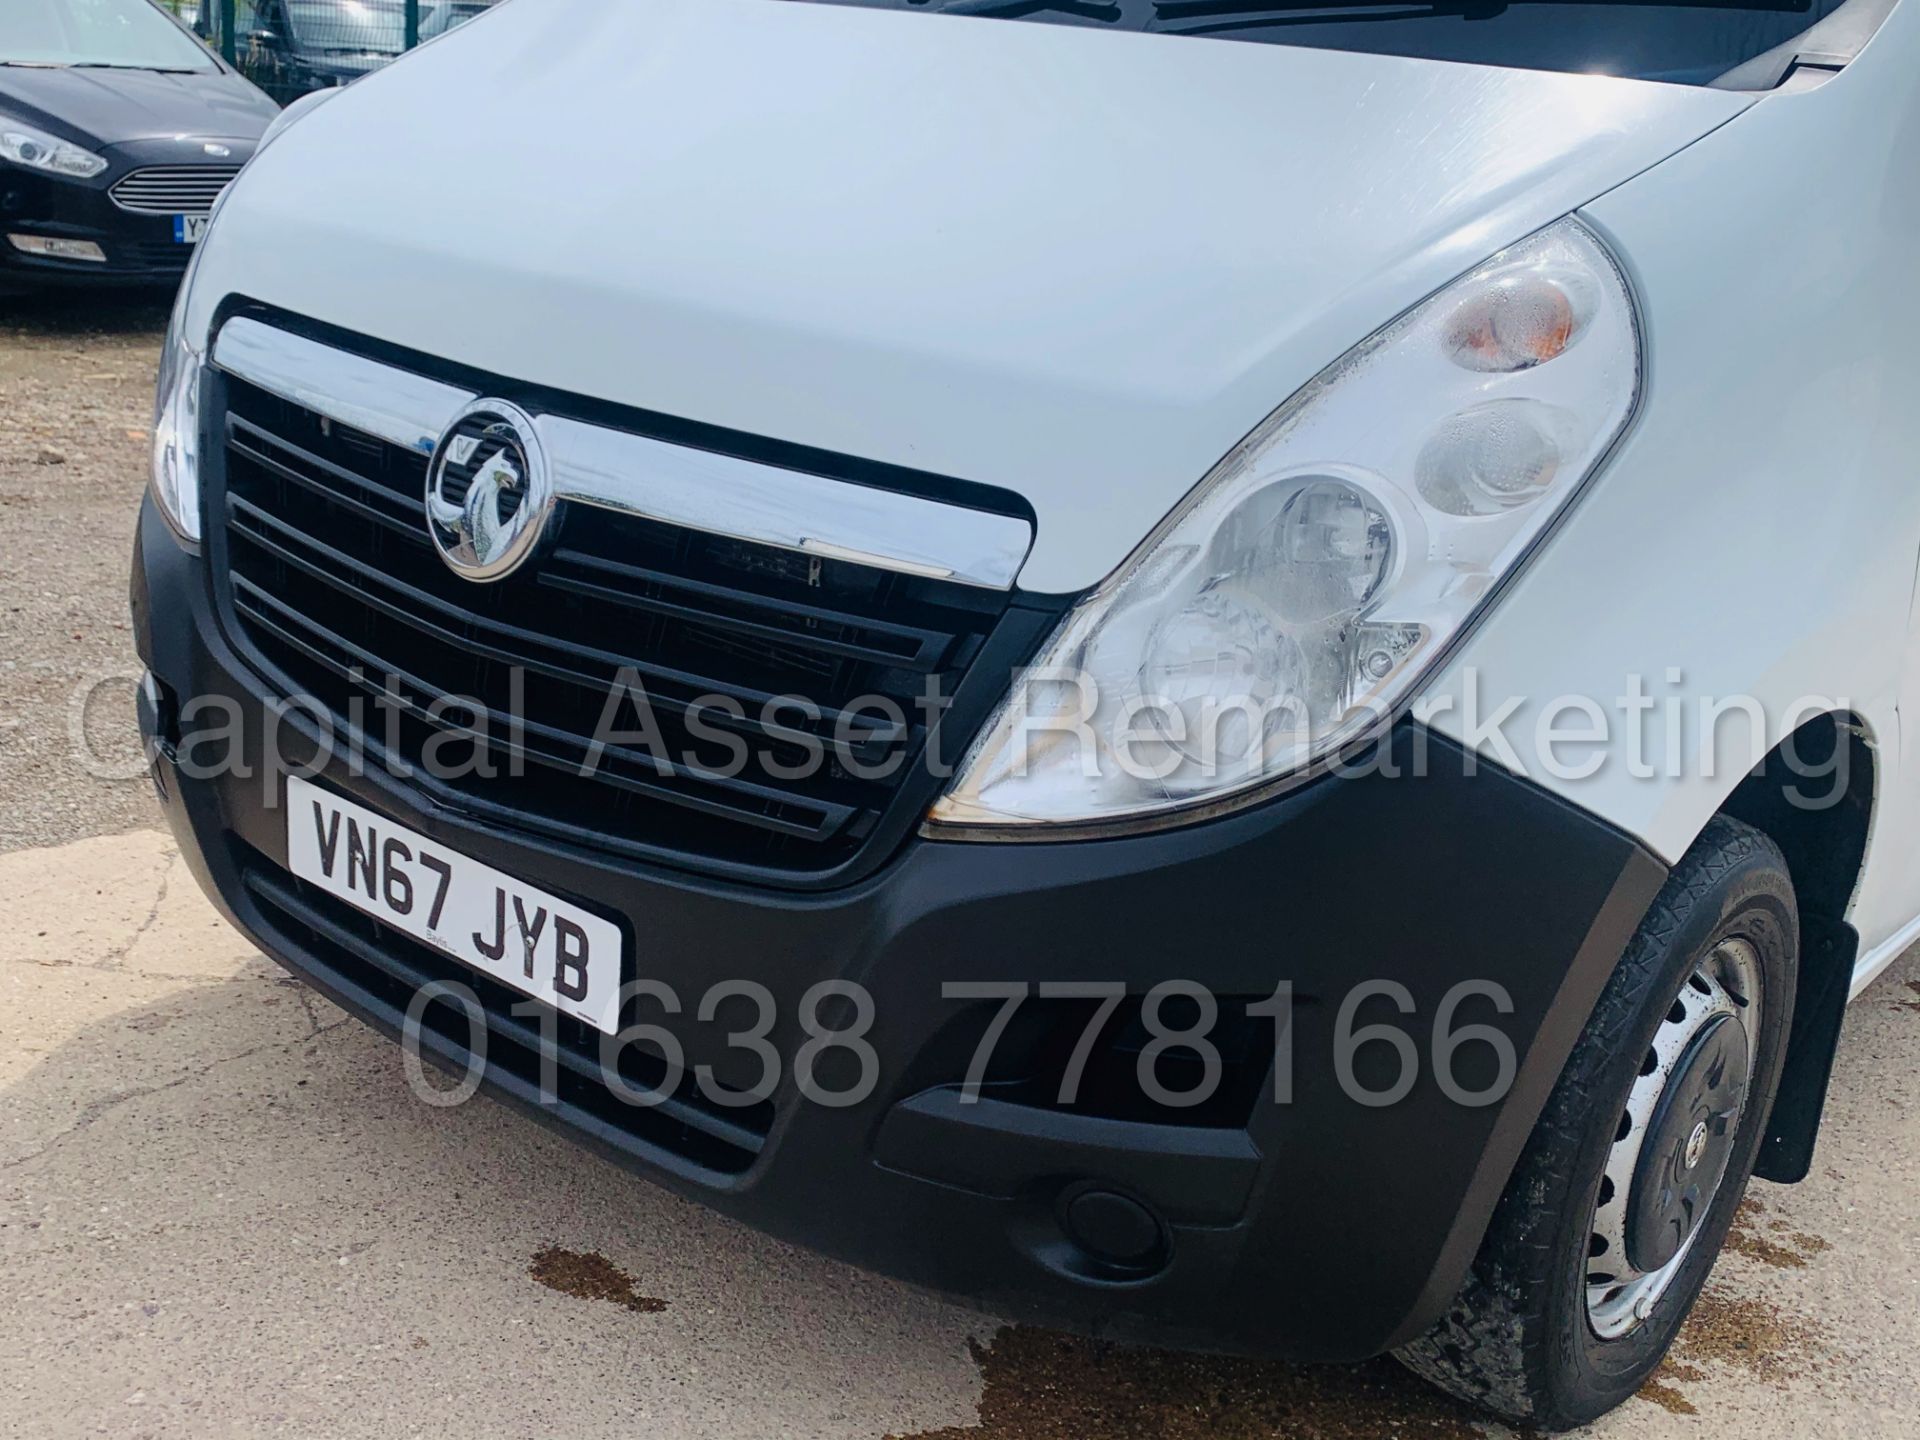 (ON SALE) VAUXHALL MOVANO *MWB HI-ROOF* (2018 - EURO 6) '2.3 CDTI - 130 BHP - 6 SPEED' (1 OWNER) - Image 16 of 39